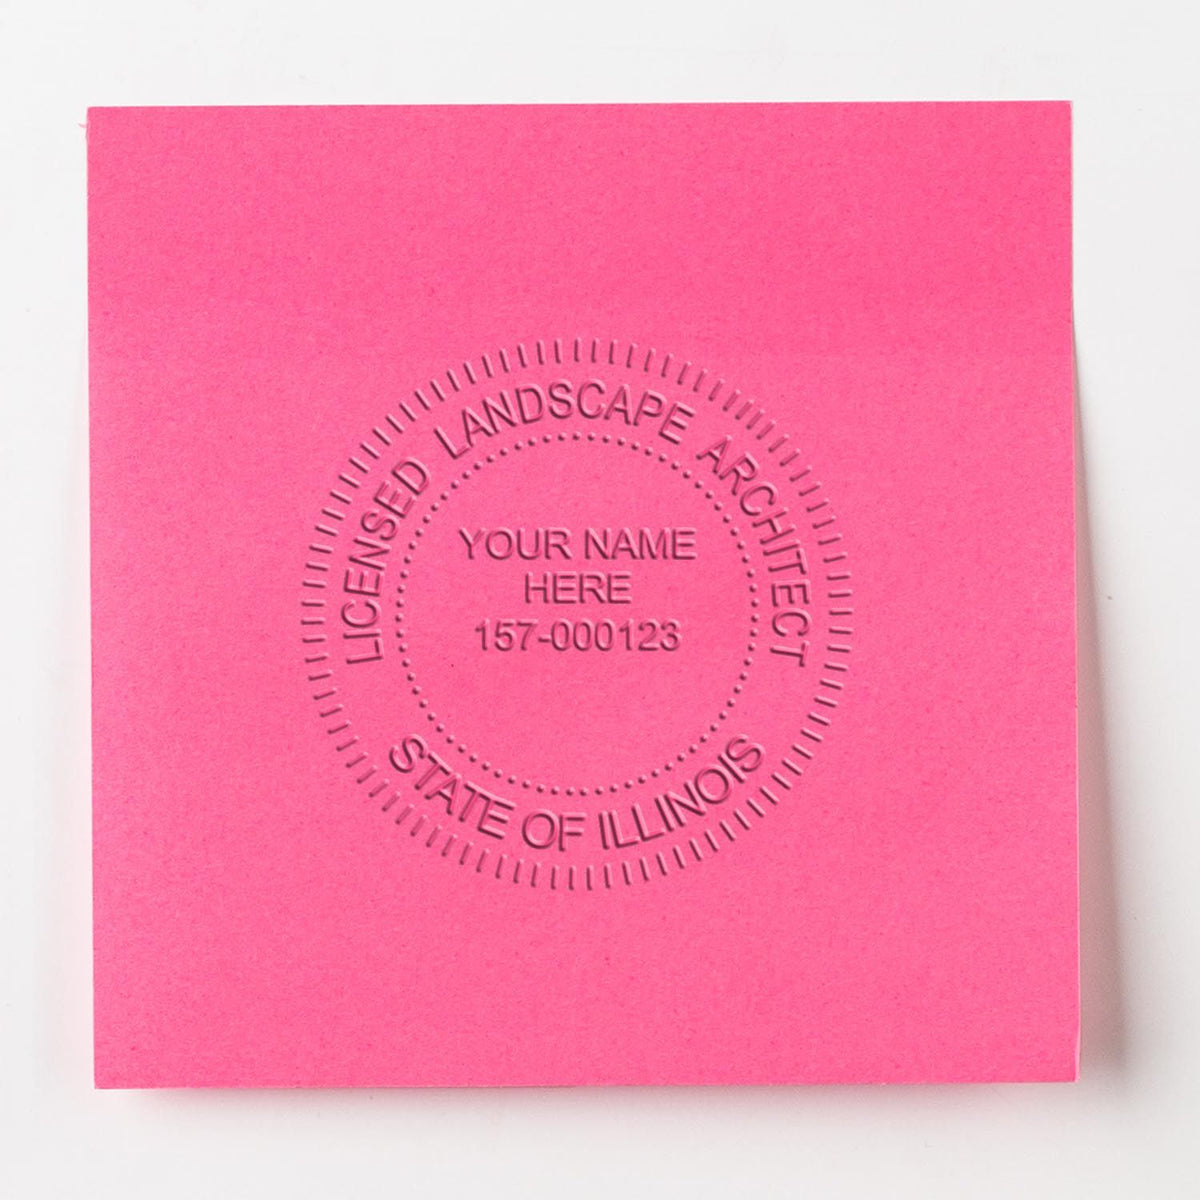 An in use photo of the Gift Illinois Landscape Architect Seal showing a sample imprint on a cardstock